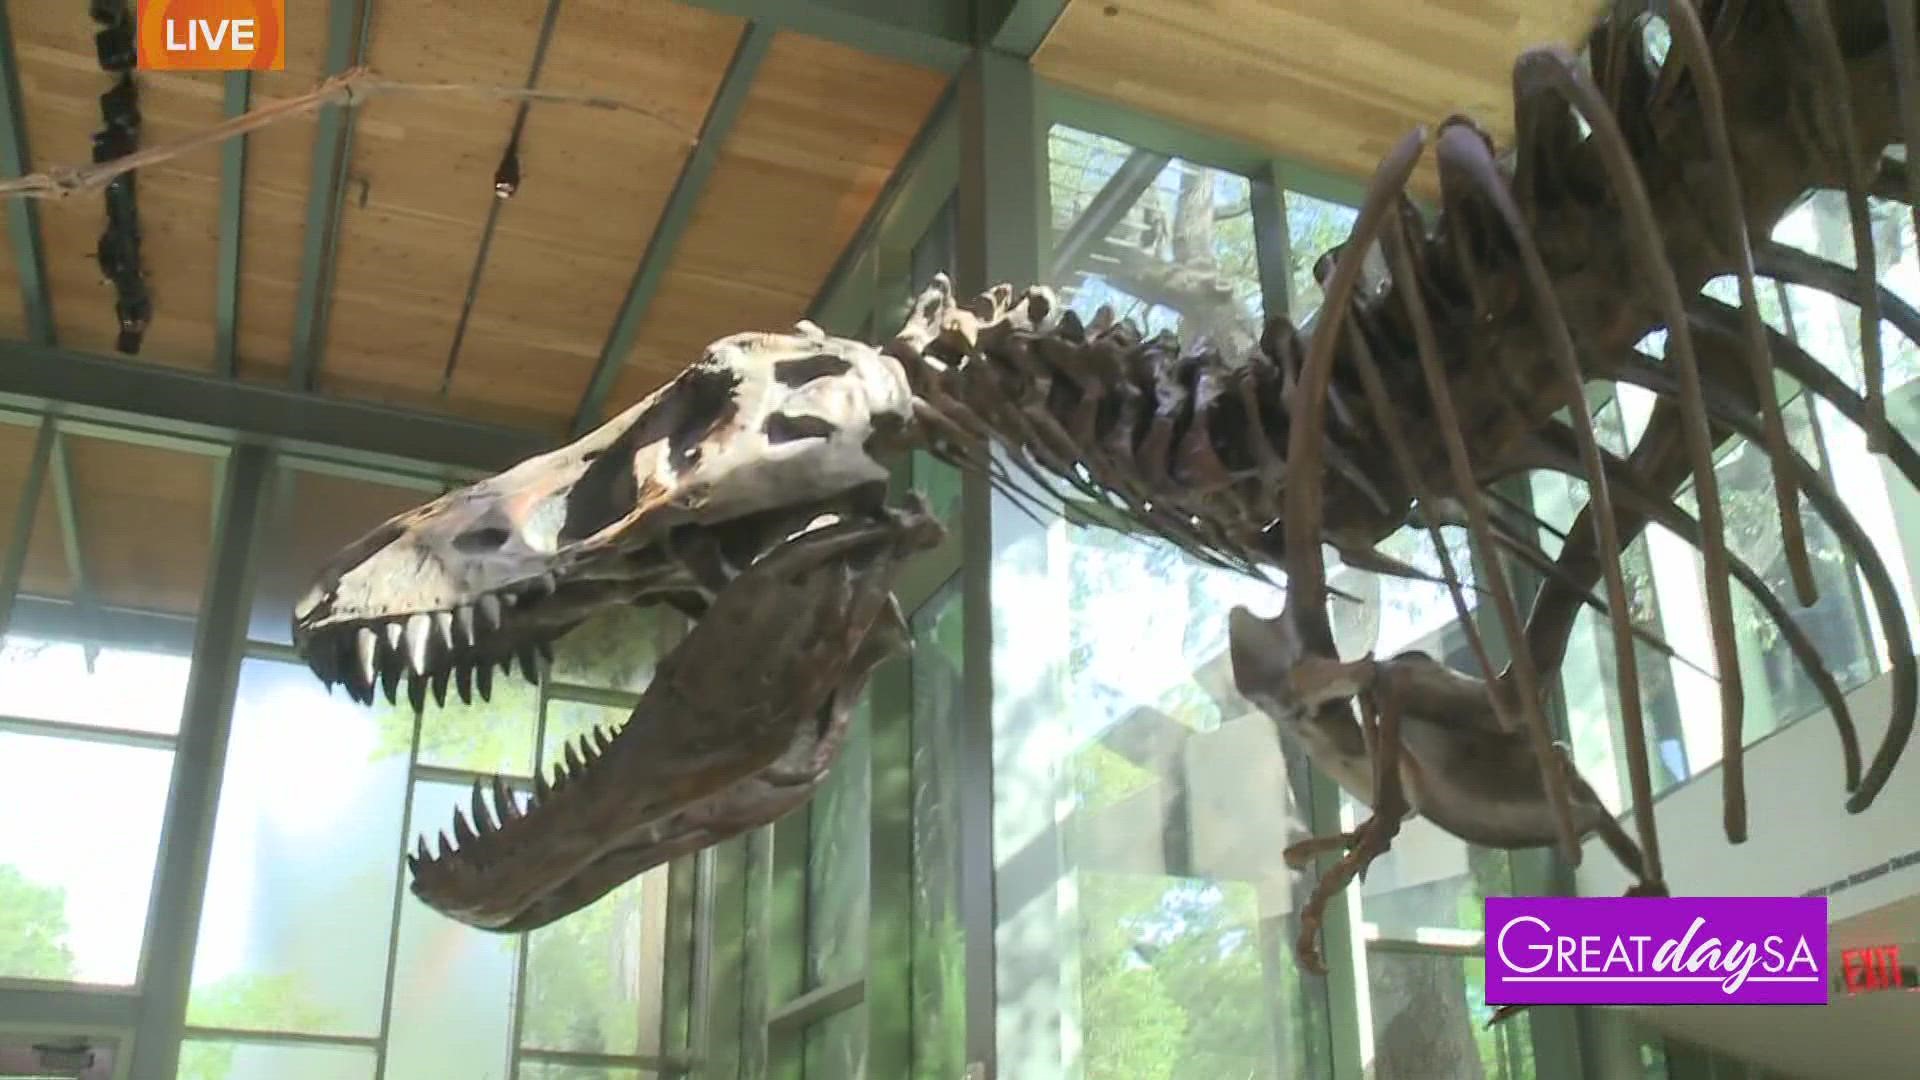 Paleontologist, Dr. Thomas Adams, PhD, shares what to expect at the Witte Museum Dinosaur exhibit